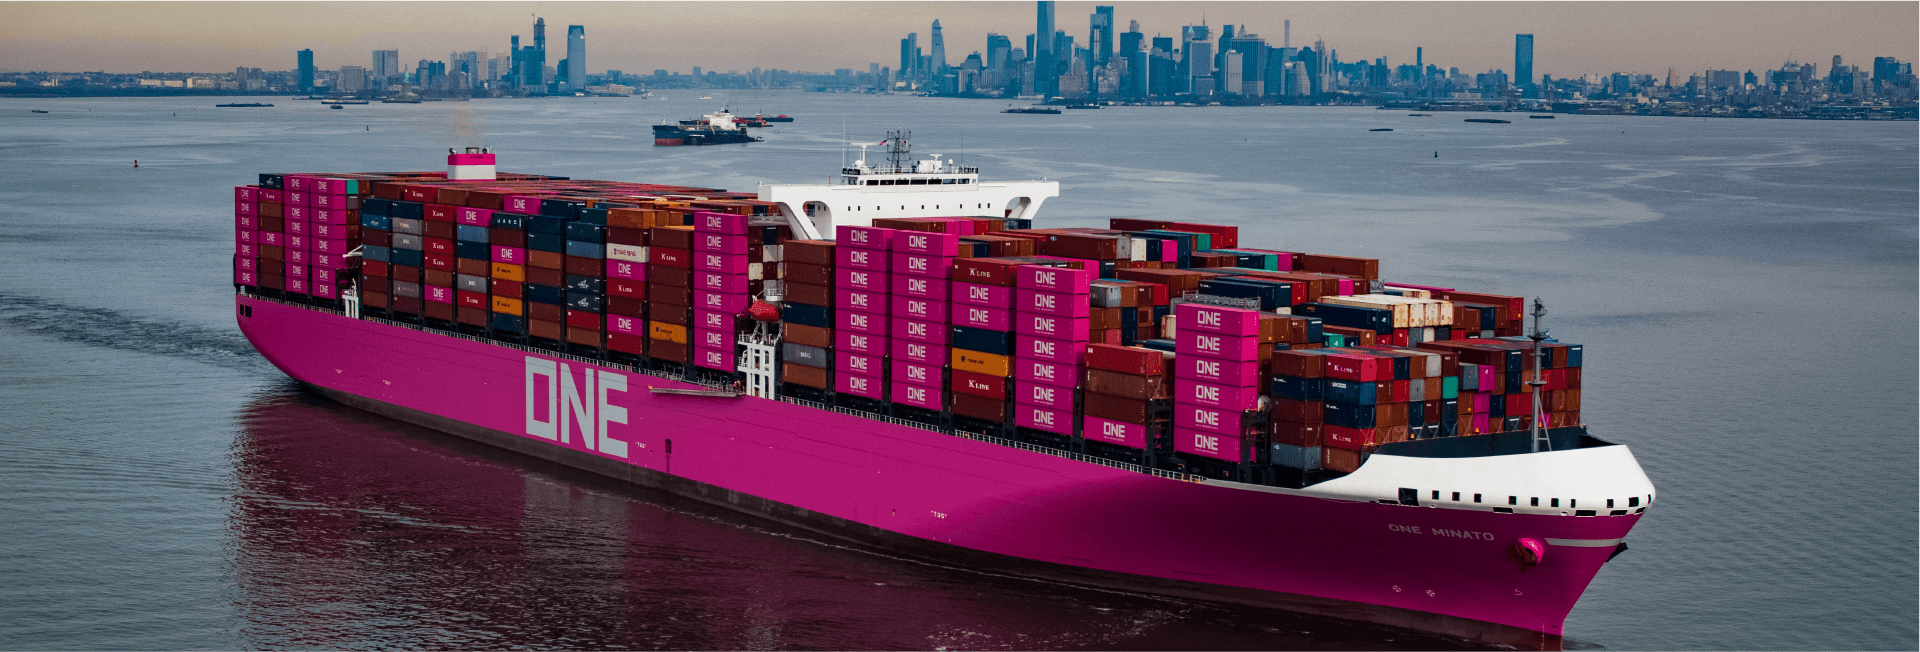 ONE unveils growth strategy investing $20 billion by 2030 – Maritime